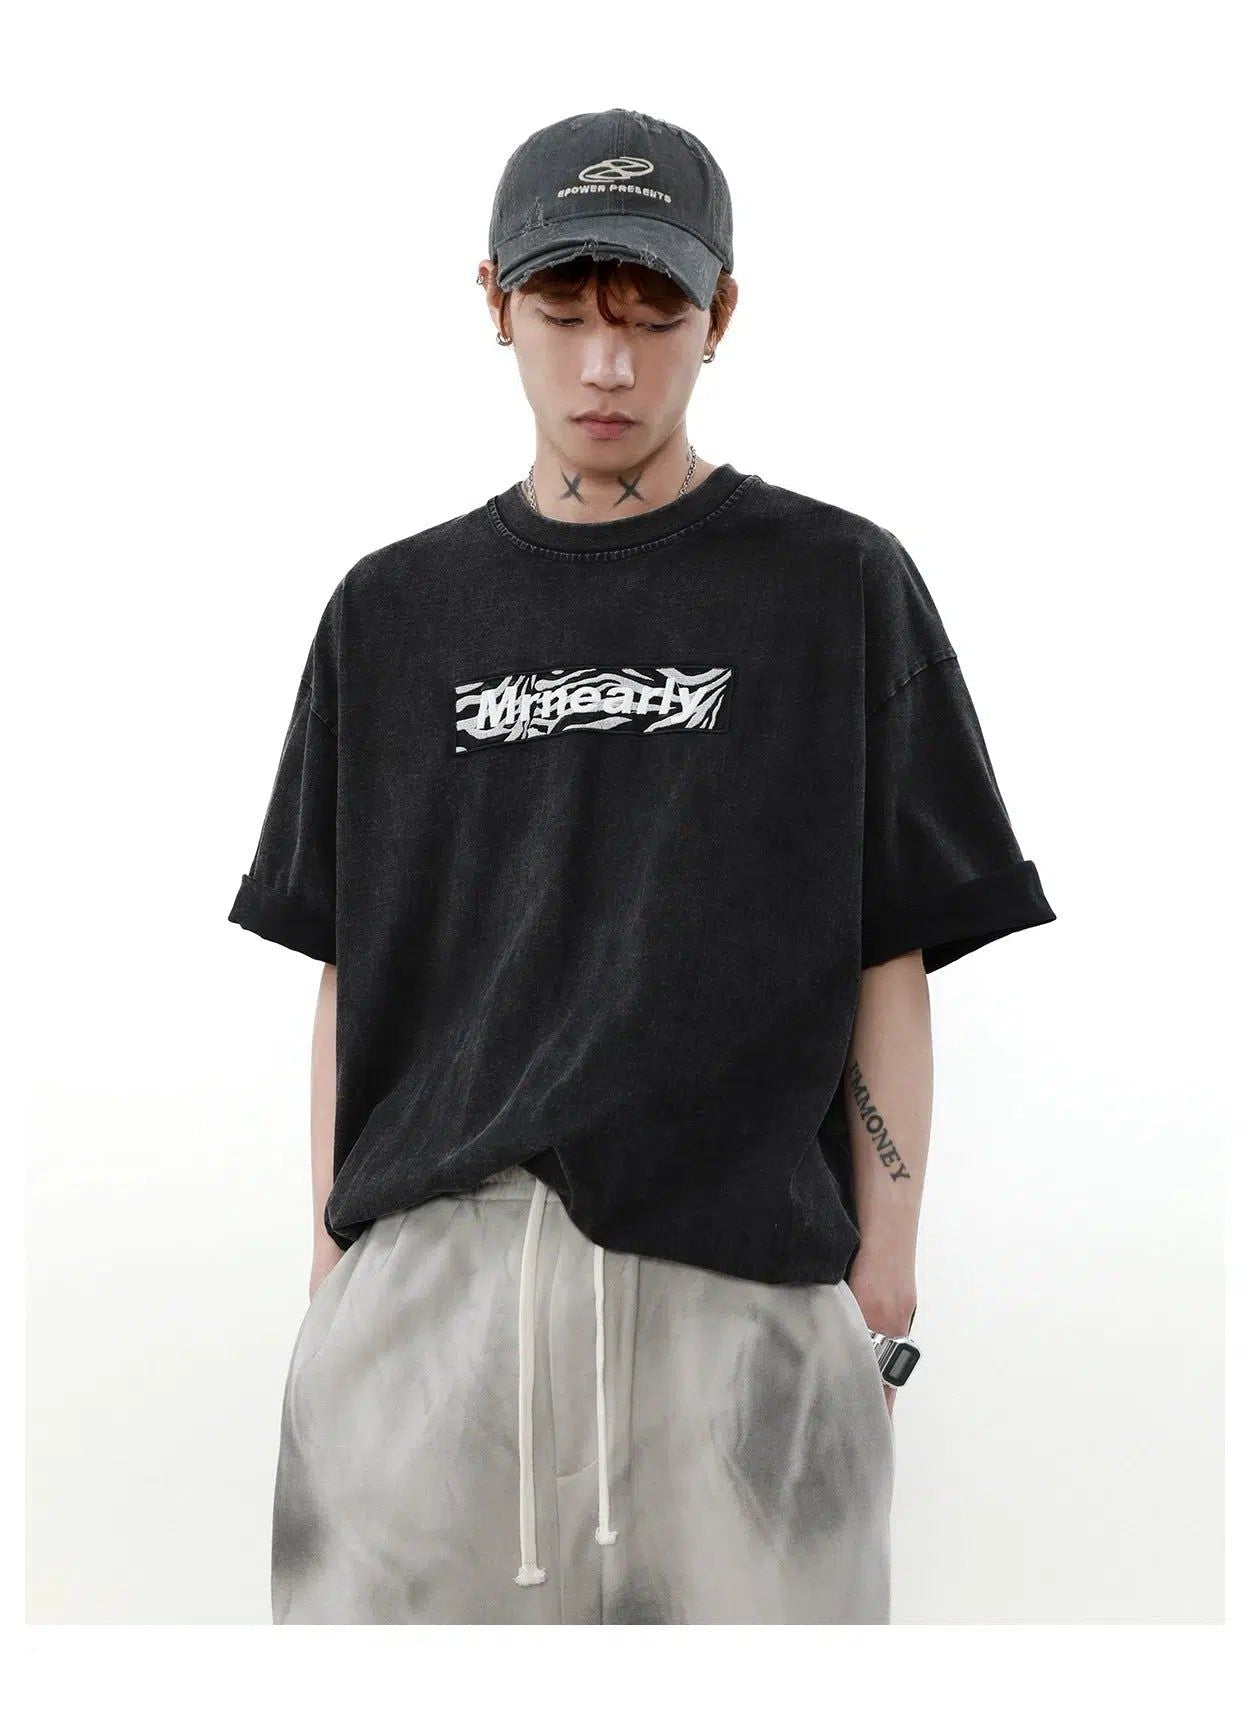 Lettered Logo Embroidery T-Shirt Korean Street Fashion T-Shirt By Mr Nearly Shop Online at OH Vault